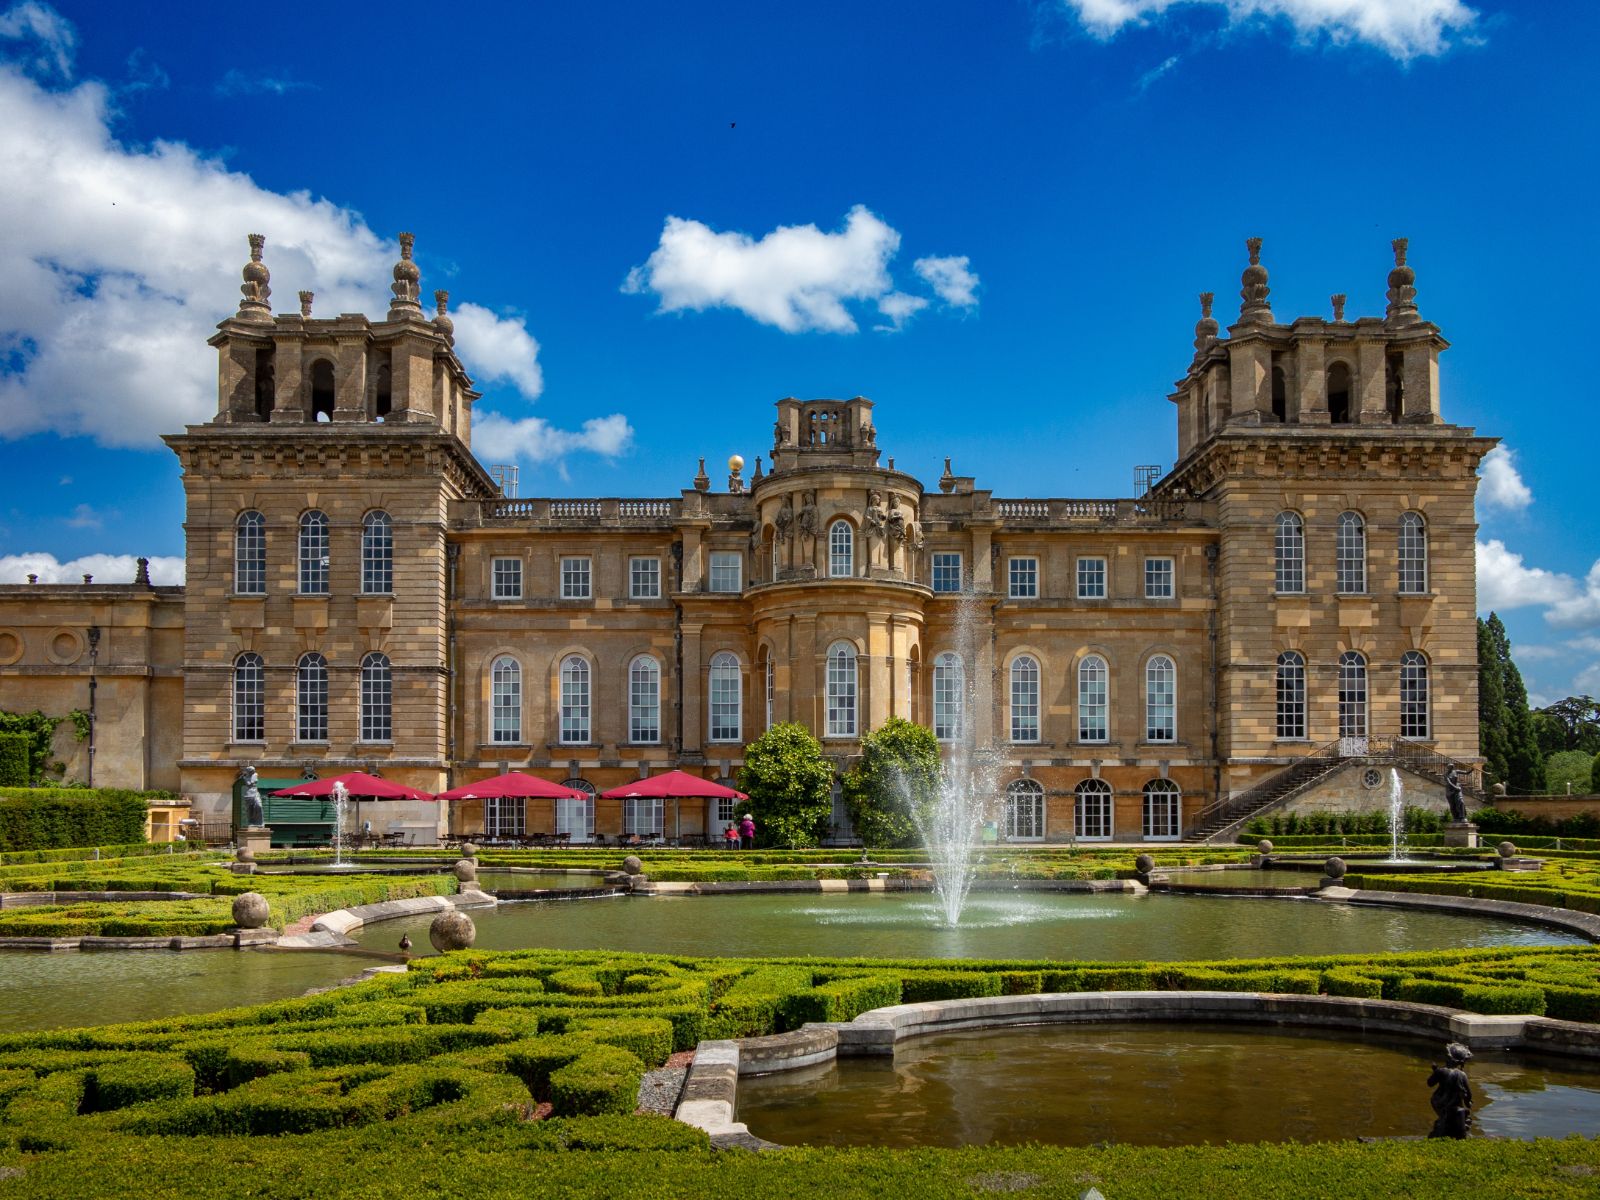 Exterior of Blenheim Palace in the United Kingdom